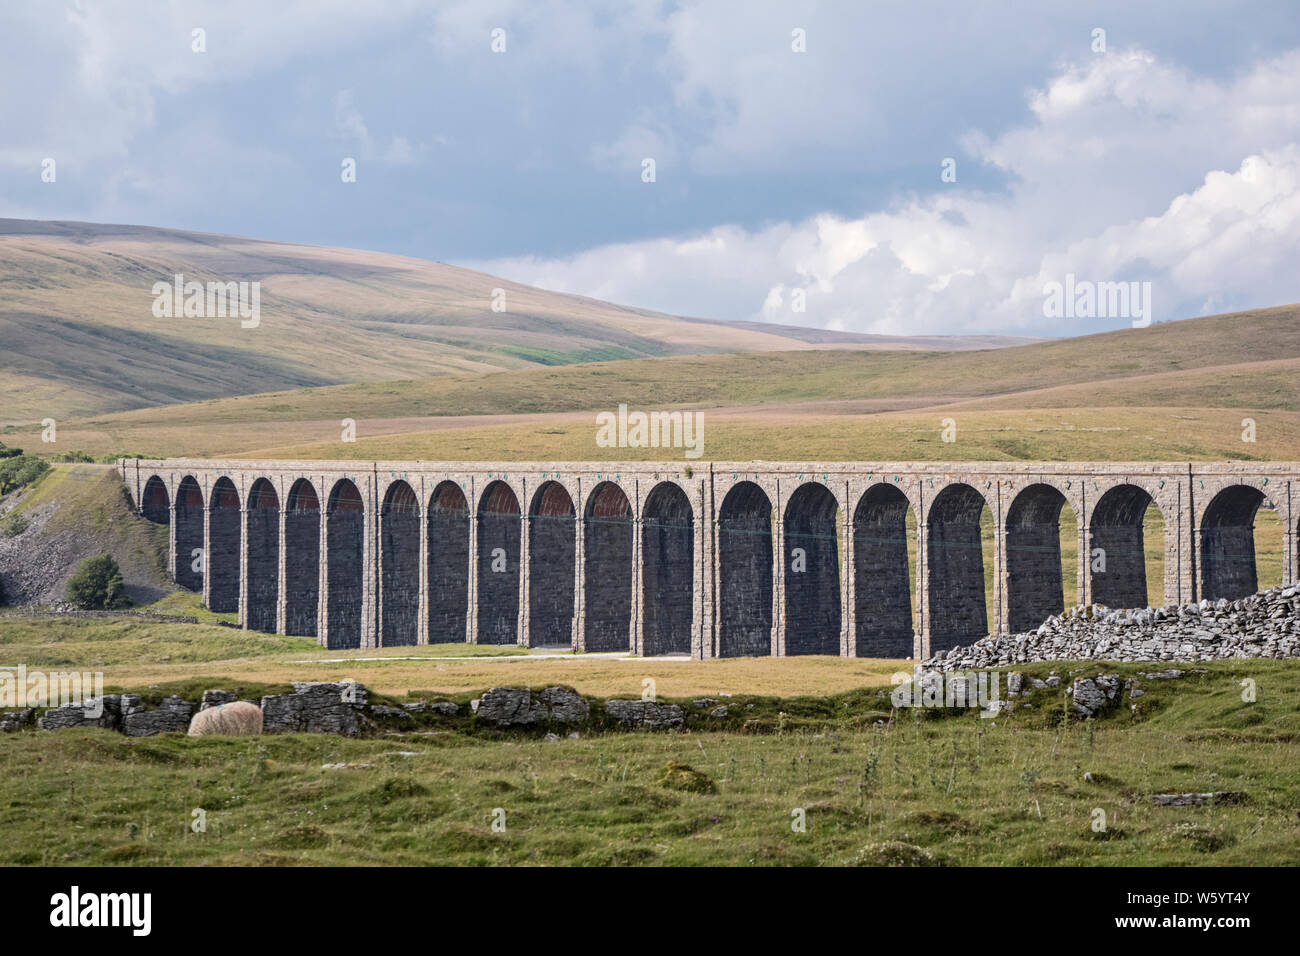 Ribblehead Viaduct or Batty Moss Viaduct on the Settle-Carlisle Railway, Yorkshire Dales National Park, North Yorkshire, England, UK Stock Photo